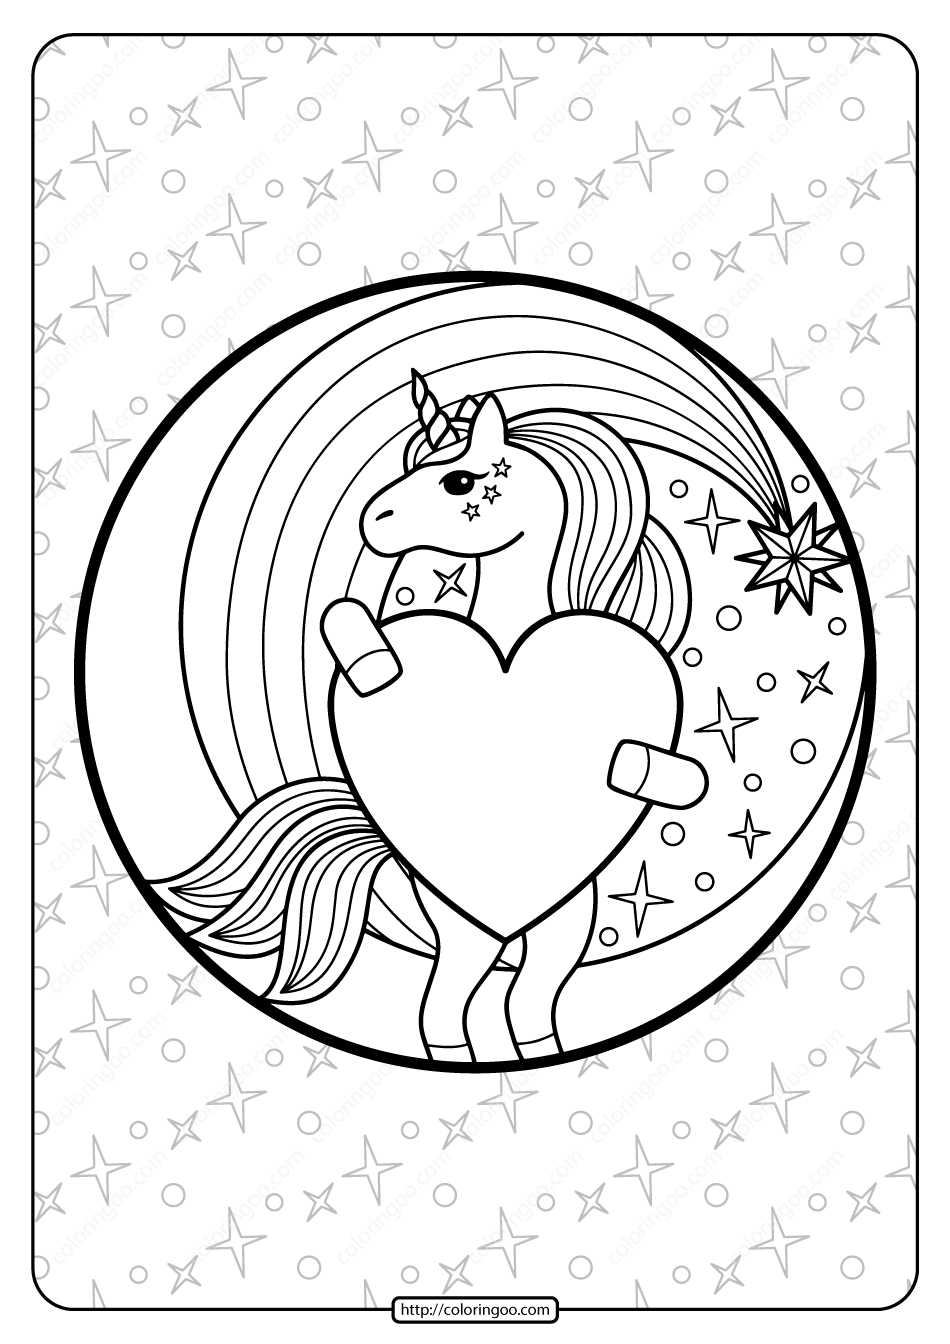 Printable Unicorn Holding a Heart Coloring Page